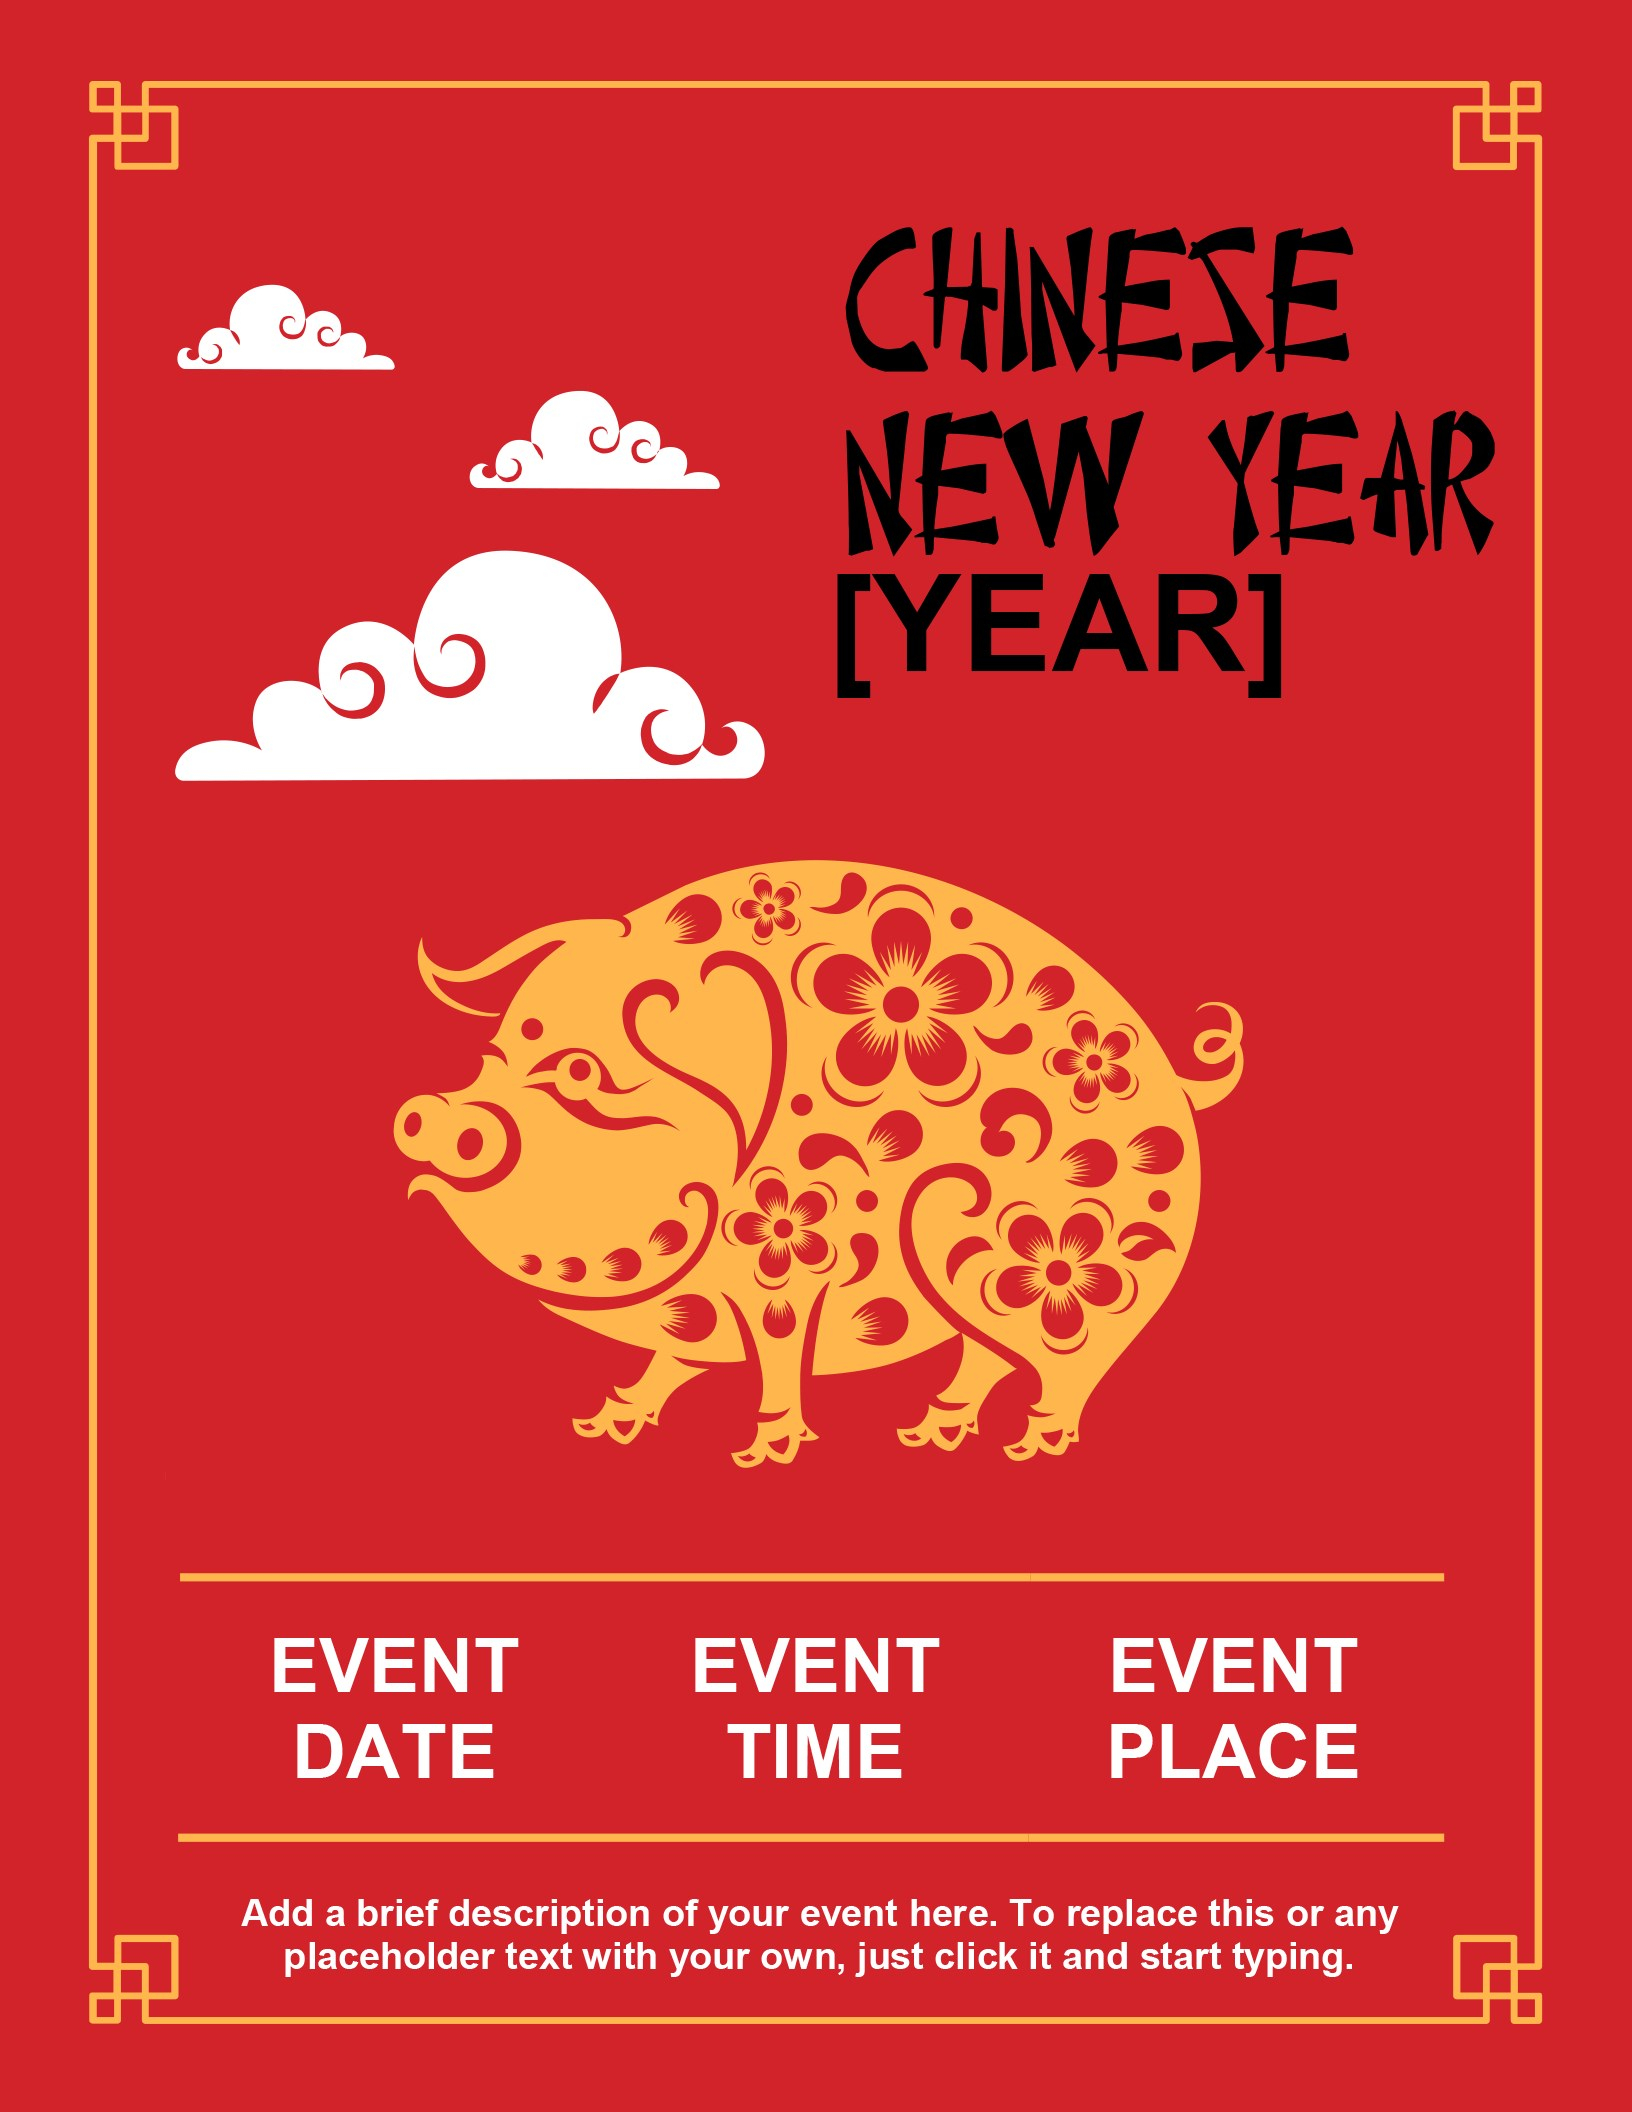 Chinese New Year Invitation Template • Business Template Ideas